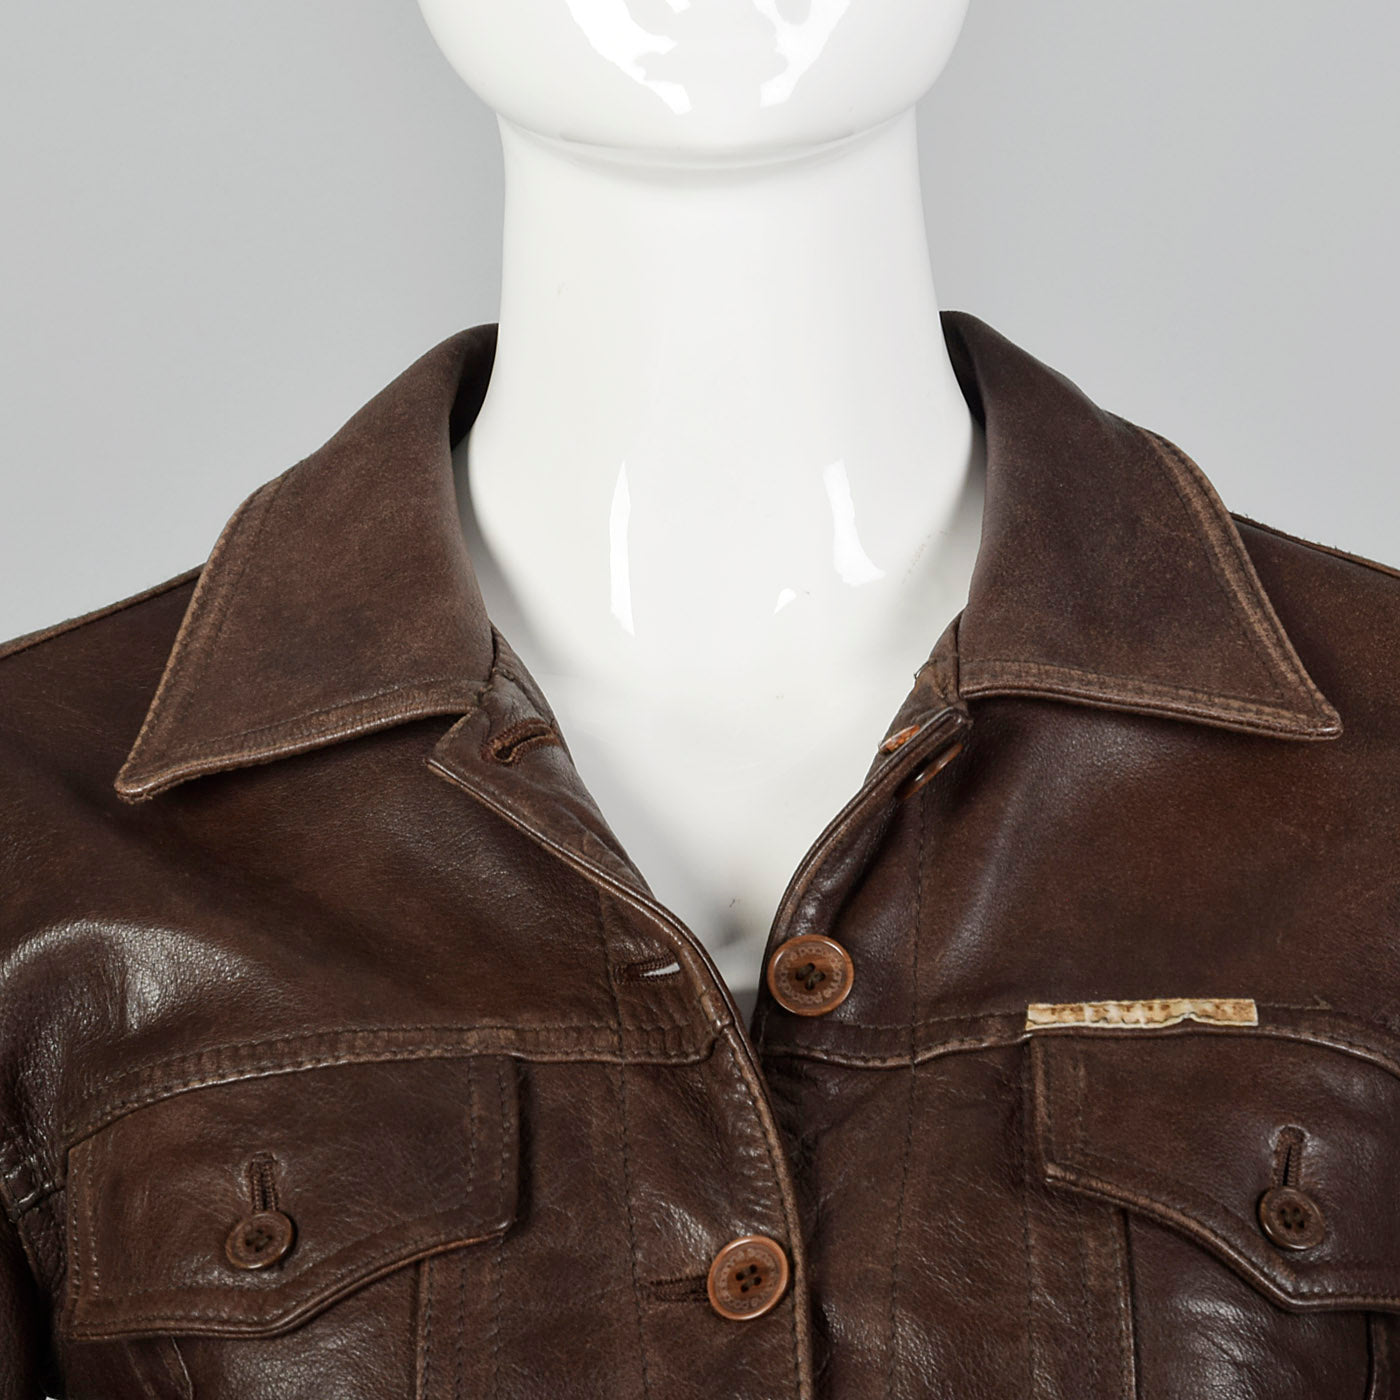 1990s Paco Rabanne Brown Leather Jacket